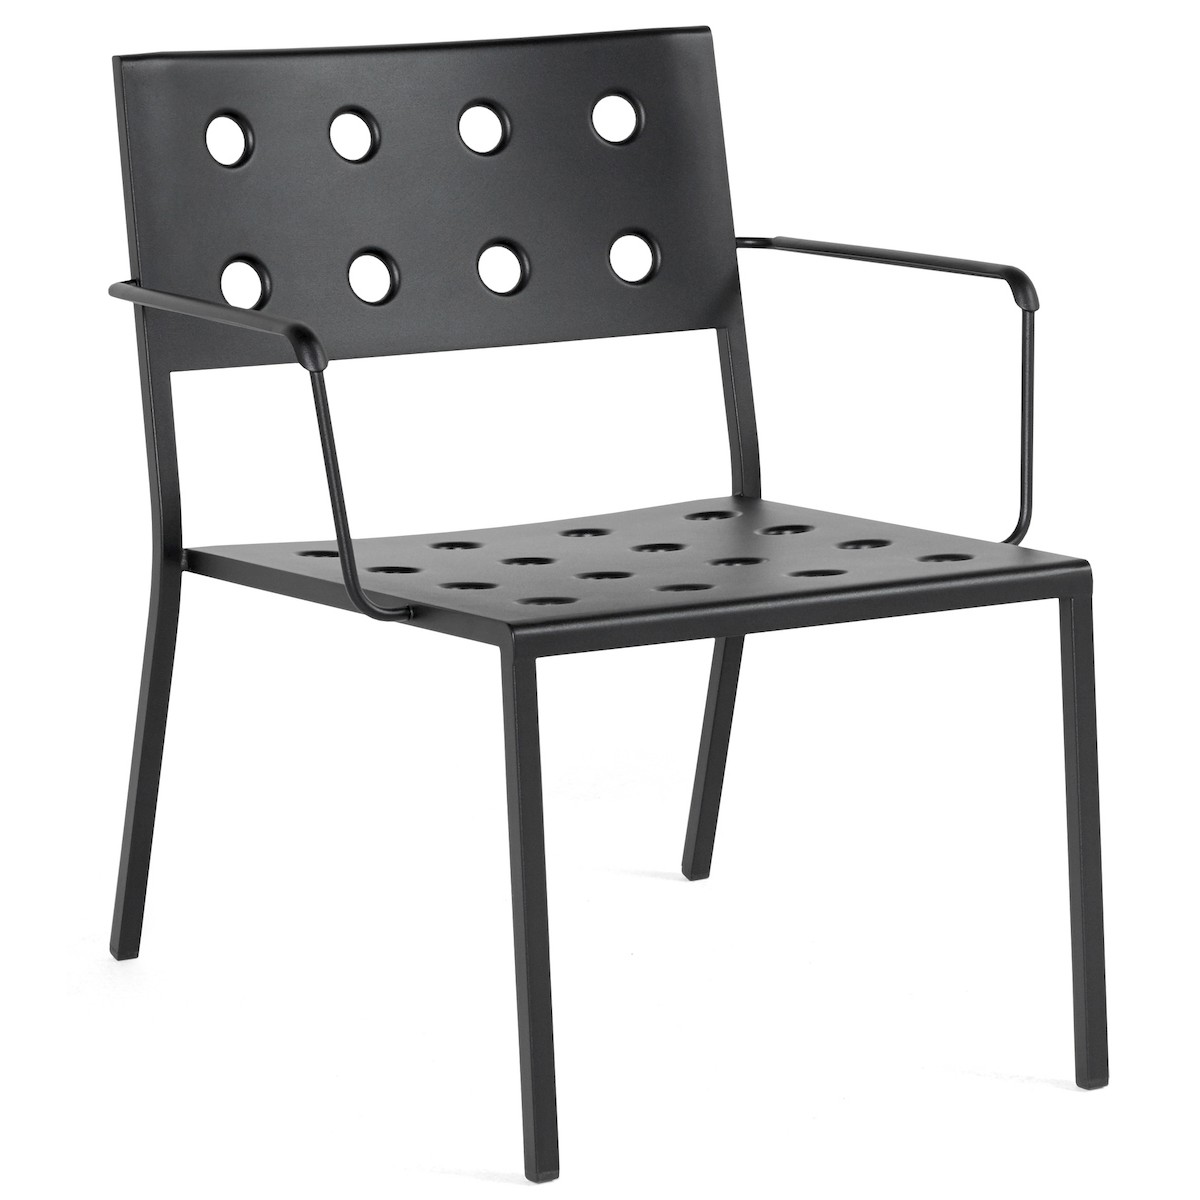 Anthracite – Fauteuil lounge Balcony avec accoudoirs